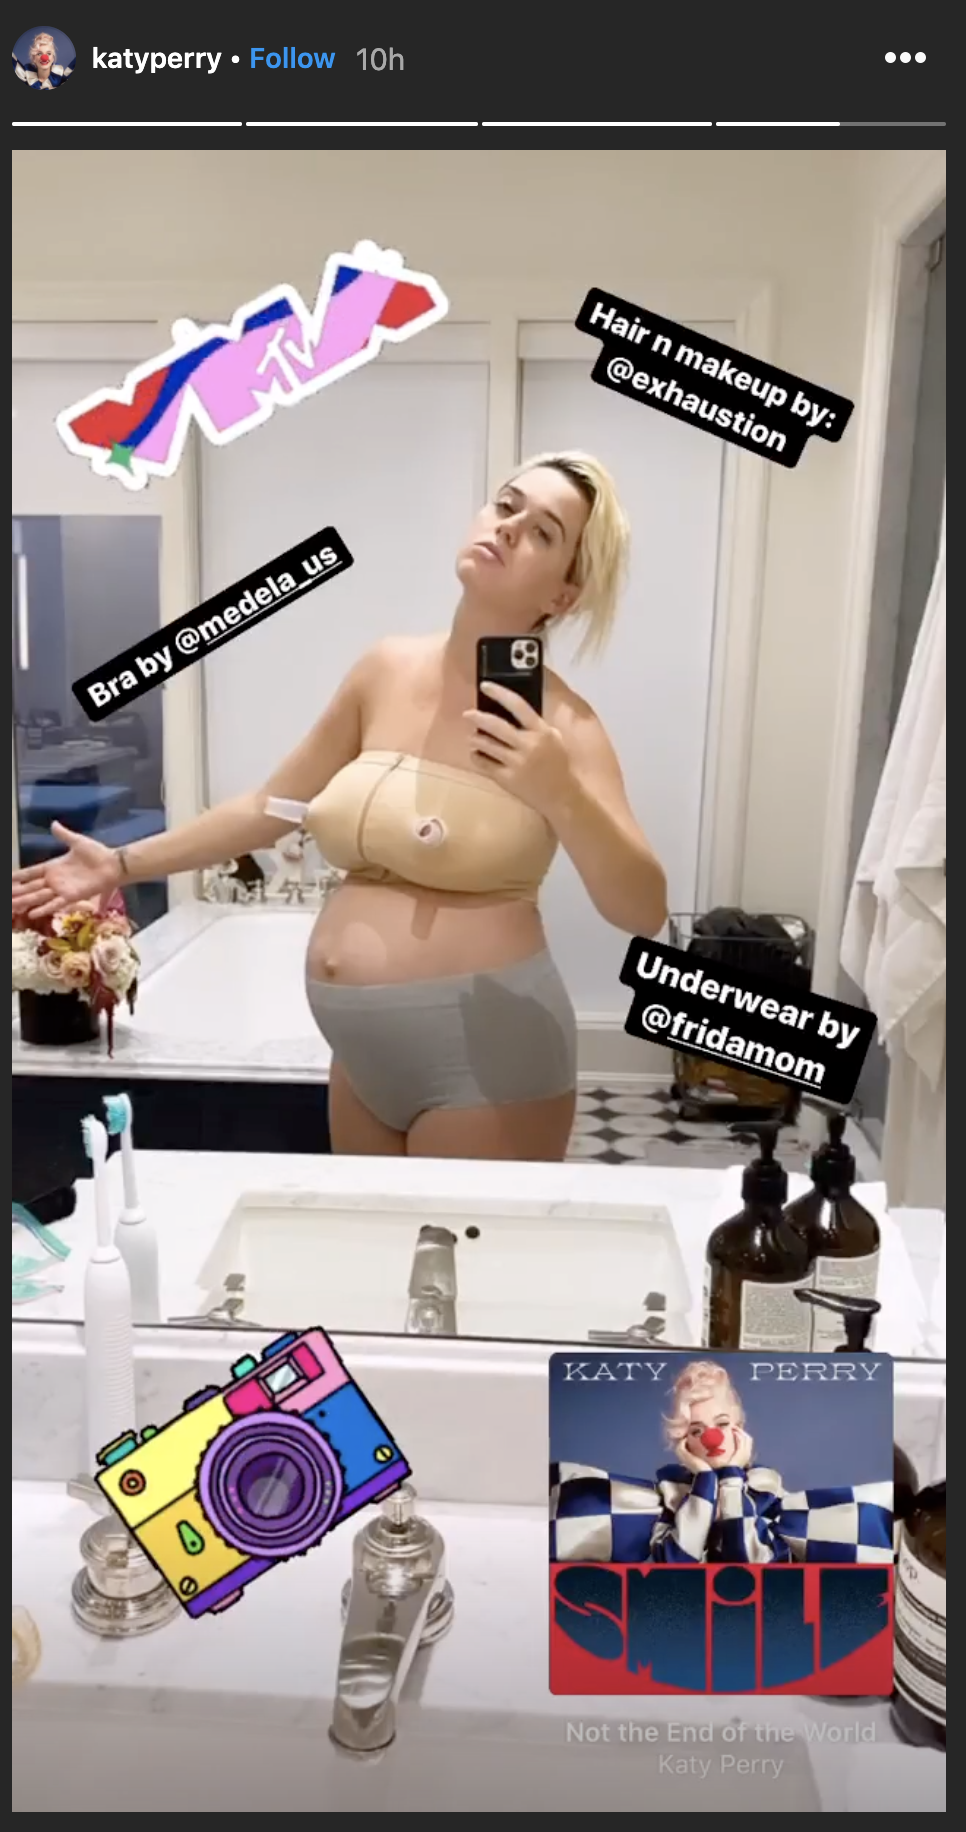 Katy reflected in the mirror, wearing support panties, pumping bra, and the caption &quot;Hair n makeup by @exhaustion&quot;